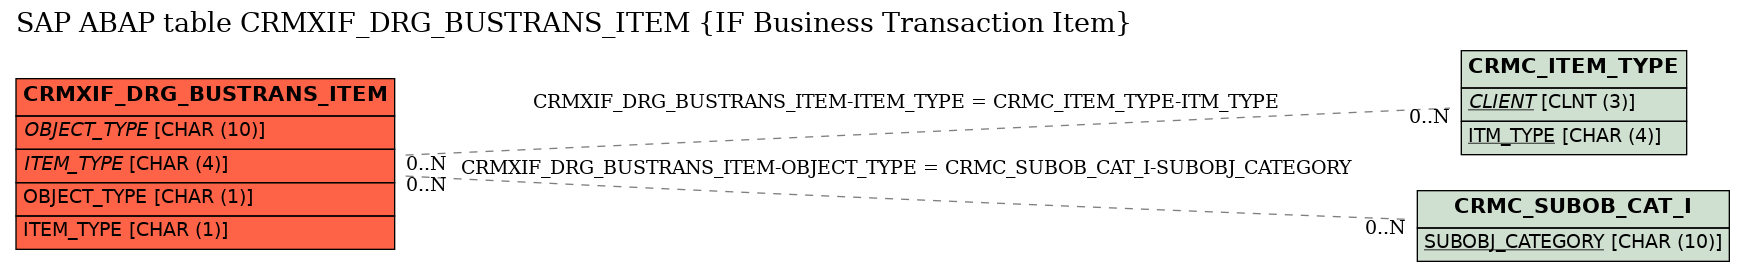 E-R Diagram for table CRMXIF_DRG_BUSTRANS_ITEM (IF Business Transaction Item)